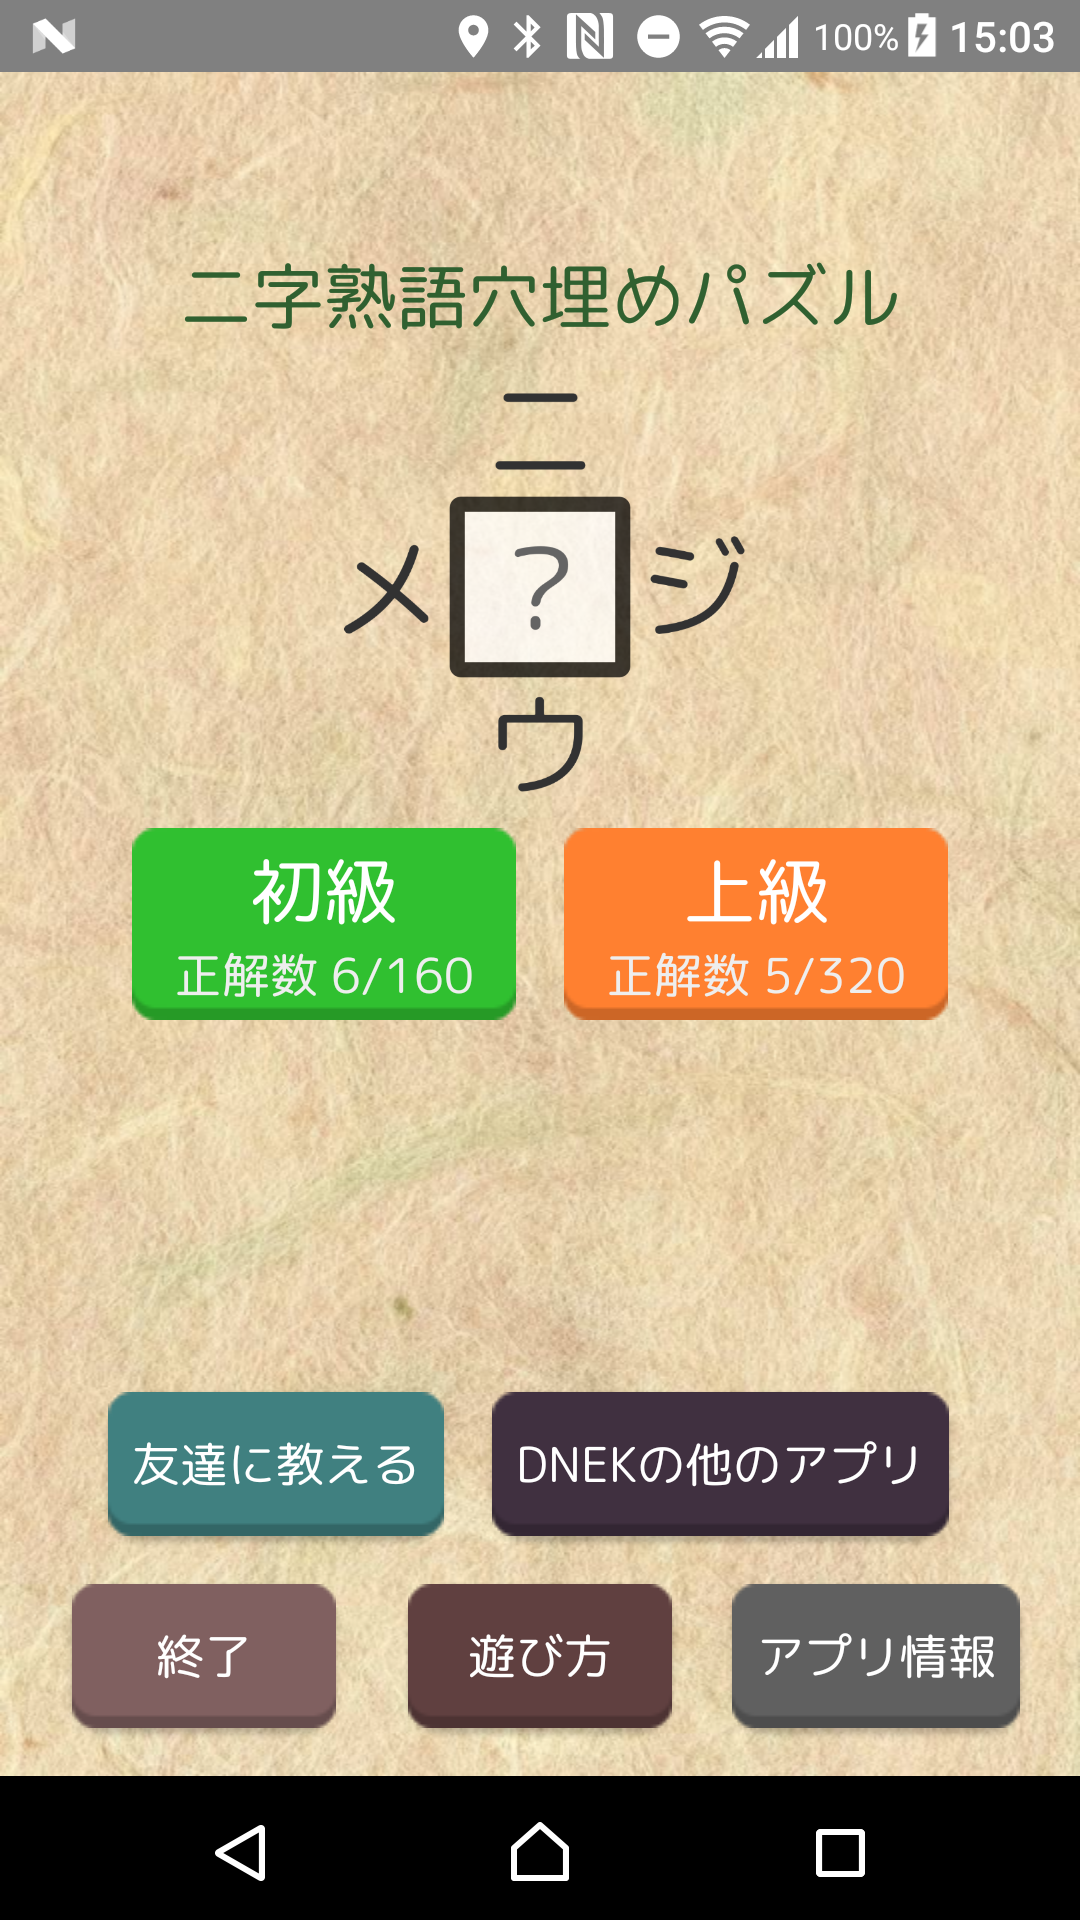 Screenshot 1 of [Kanji puzzle 480 questions] Fill-in-the-blank two-letter idiom puzzle ~Nijiume~ 3.2.3